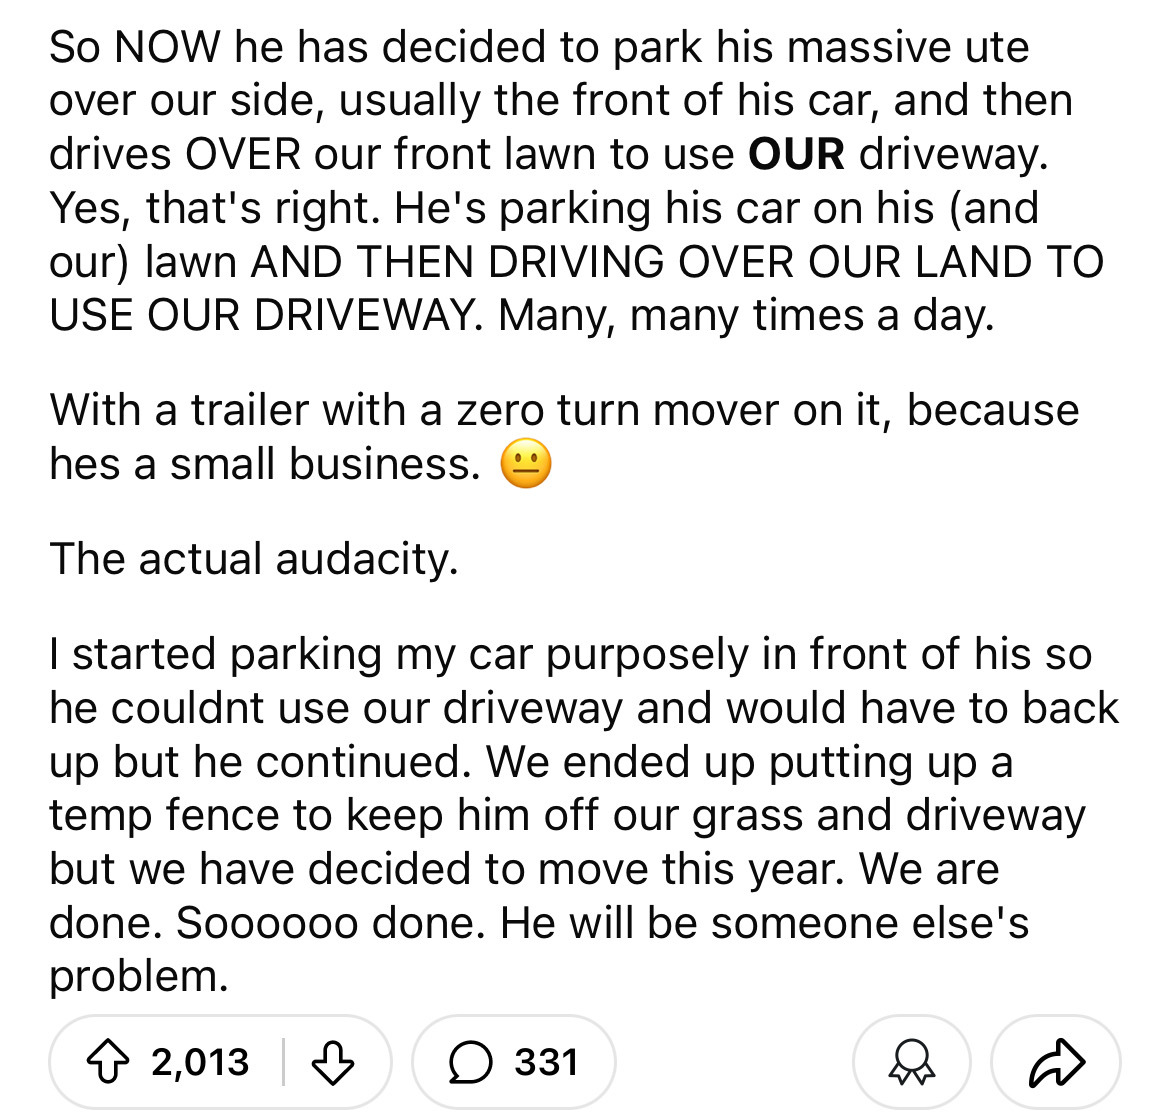 document - So Now he has decided to park his massive ute over our side, usually the front of his car, and then drives Over our front lawn to use Our driveway. Yes, that's right. He's parking his car on his and our lawn And Then Driving Over Our Land To Us